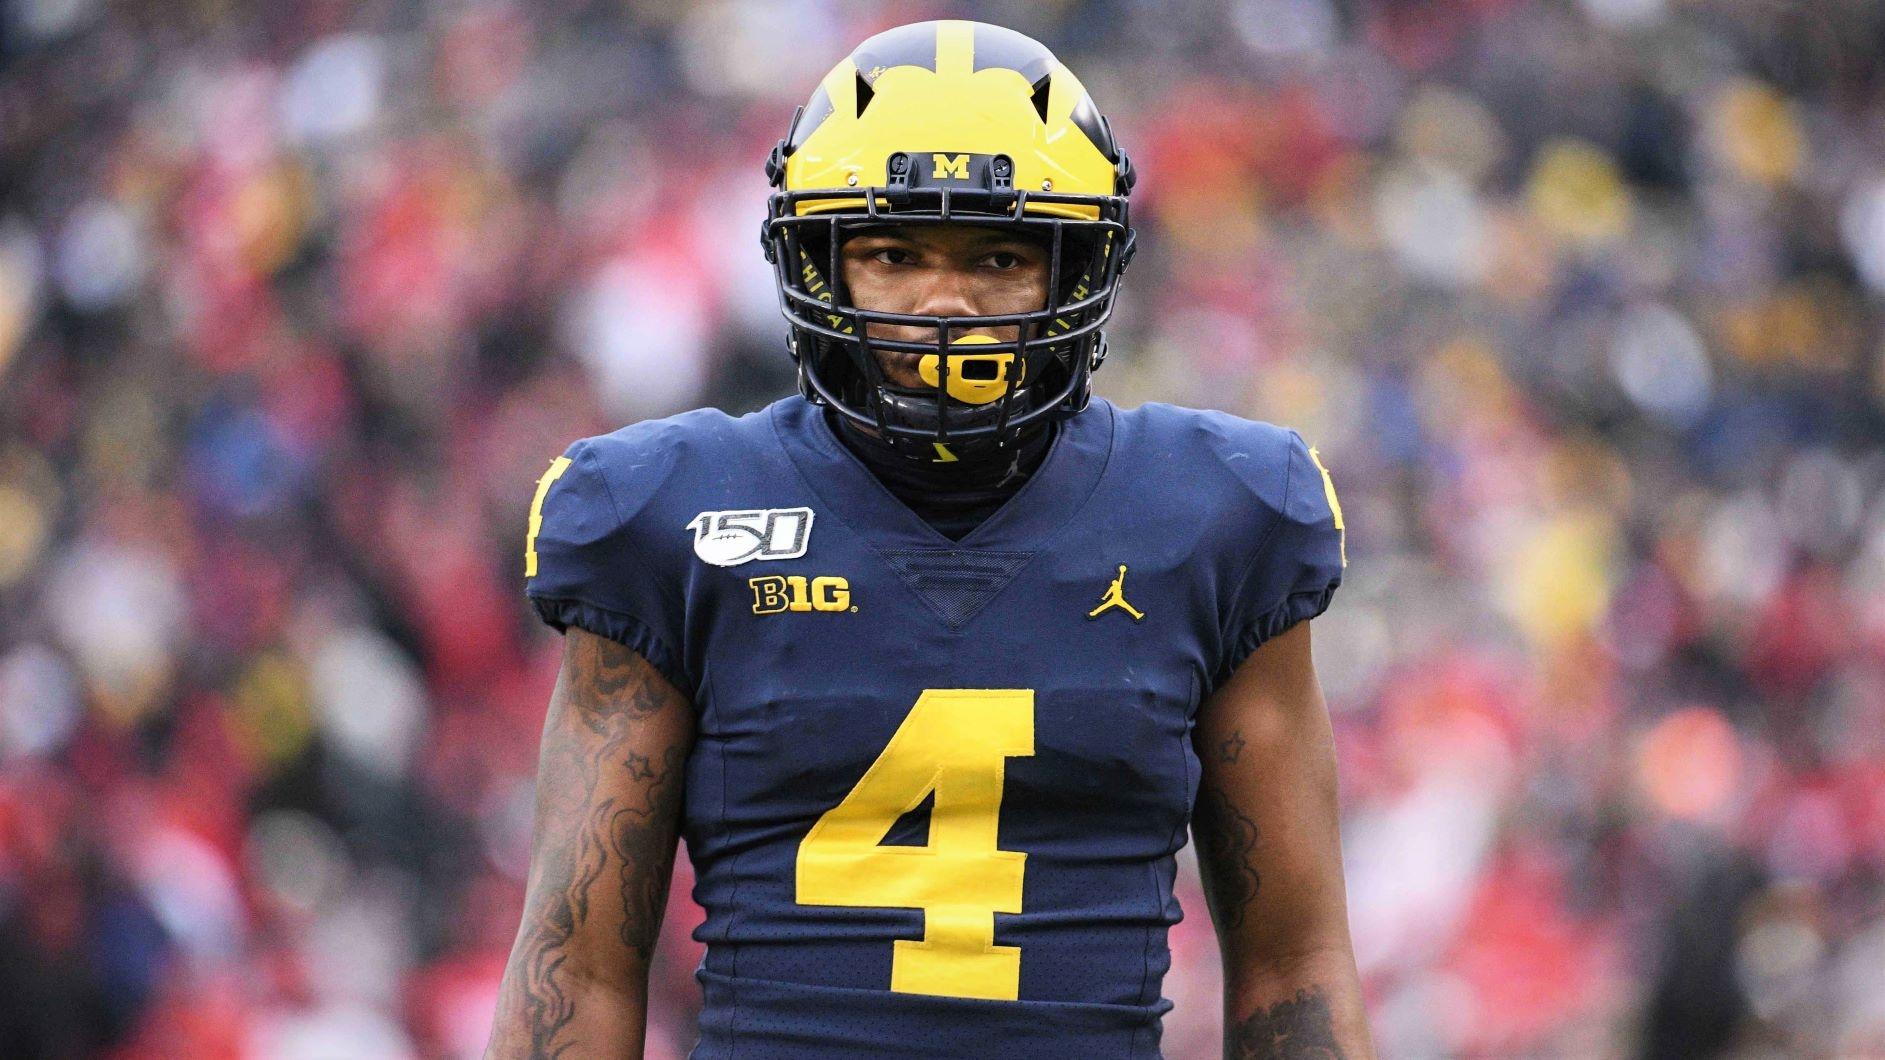 Nov 30, 2019; Ann Arbor, MI, USA; Michigan Wolverines wide receiver Nico Collins (4) during the game against the Ohio State Buckeyes at Michigan Stadium. Mandatory Credit: Tim Fuller-USA TODAY Sports / © Tim Fuller-USA TODAY Sports